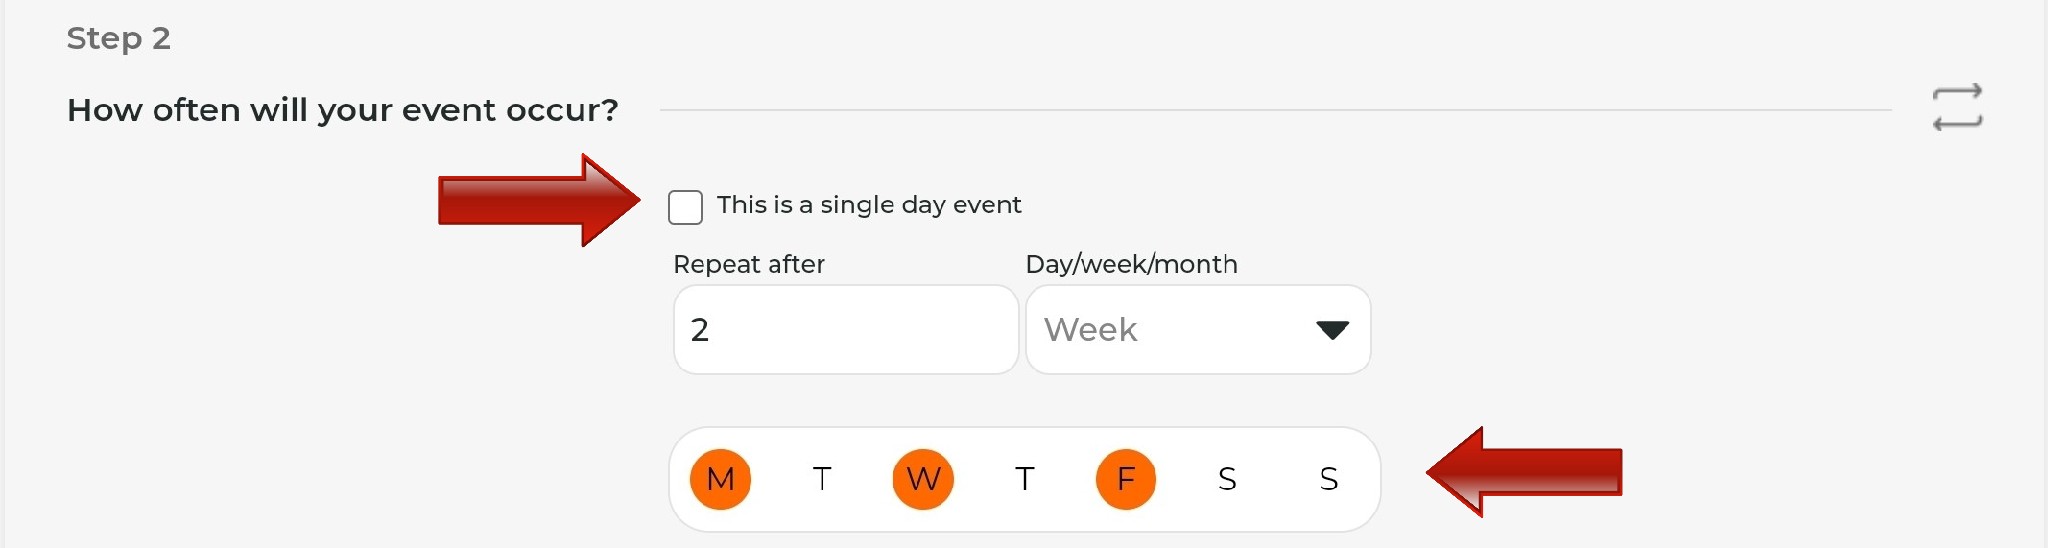 Recurring Event - How often it occurs